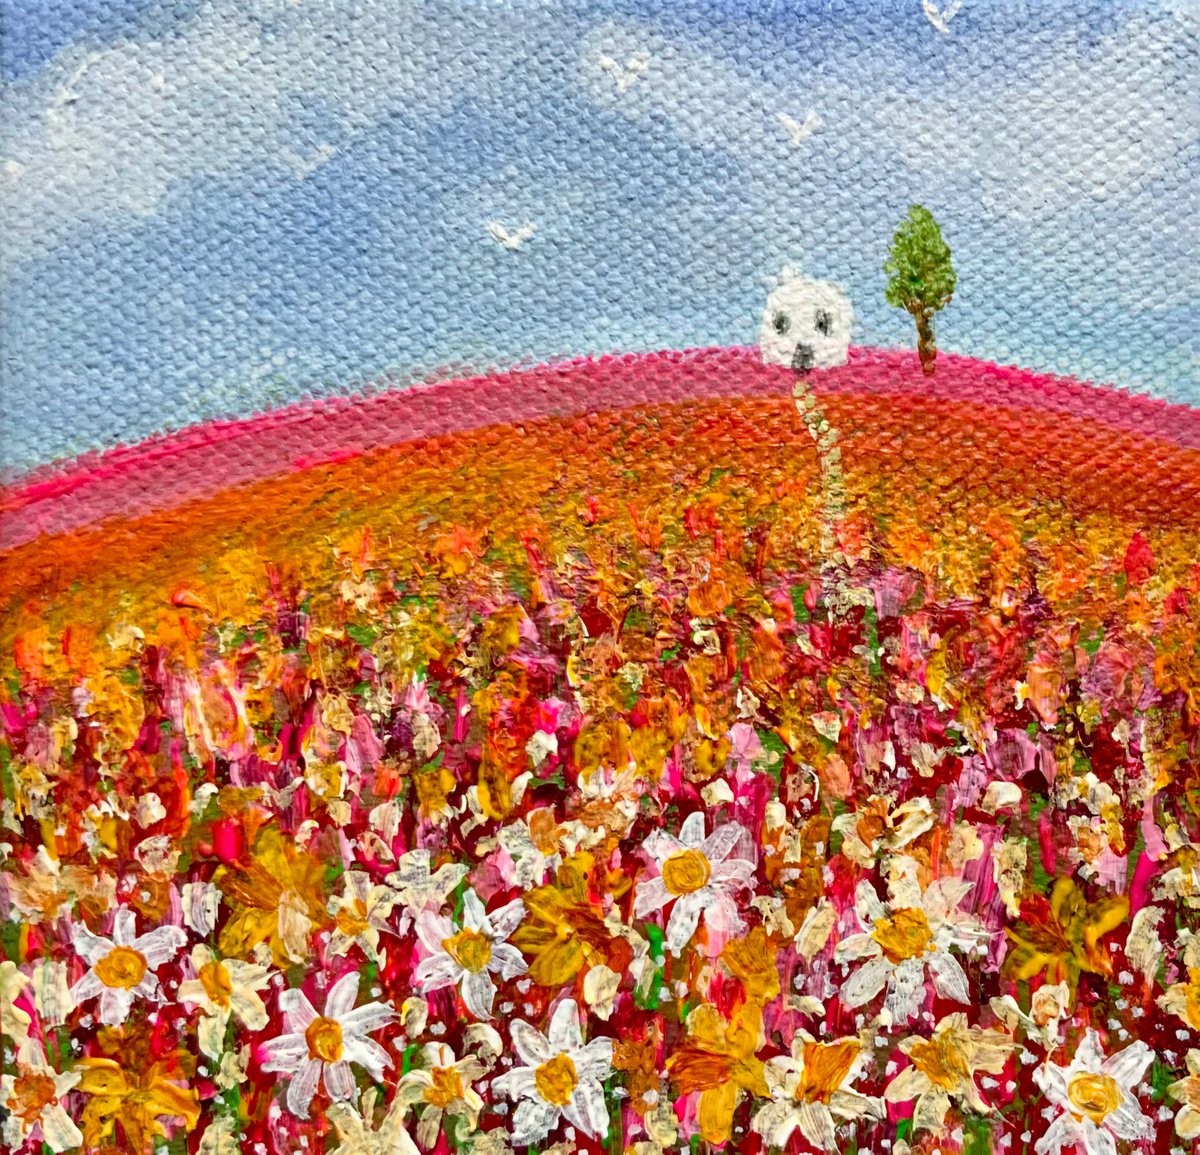 Landscape painting "Daisy Hill" acrylic on canvas by Janice MacDougall